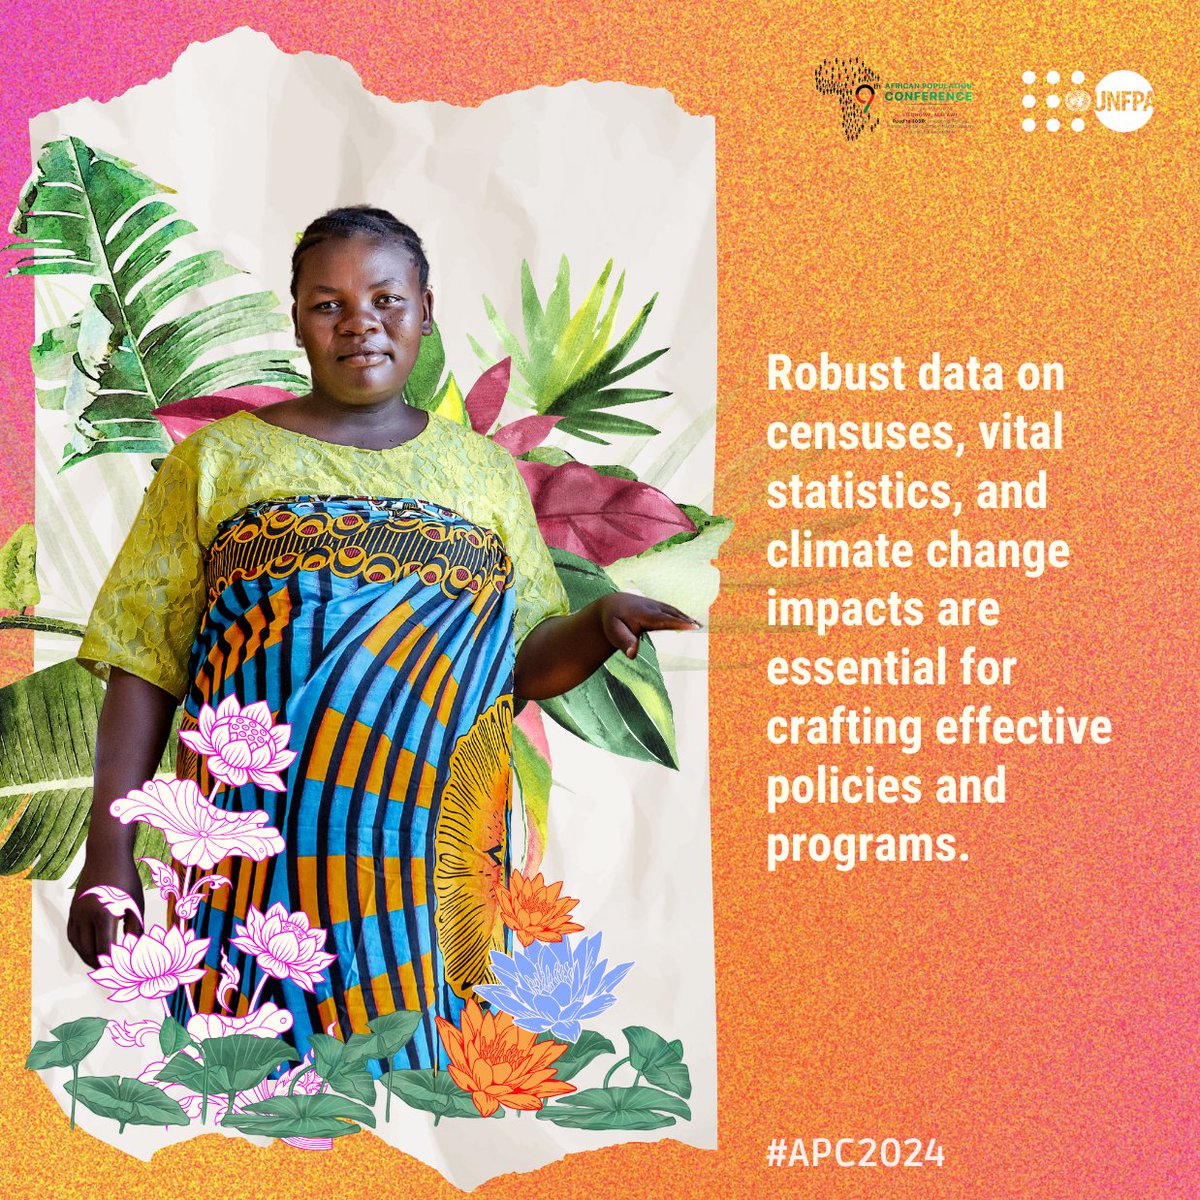 Robust data on censuses, vital statistics, and climate change impacts are essential for crafting effective policies and programs. During #APC2024 we are putting data first, helping countries with innovative data solutions.